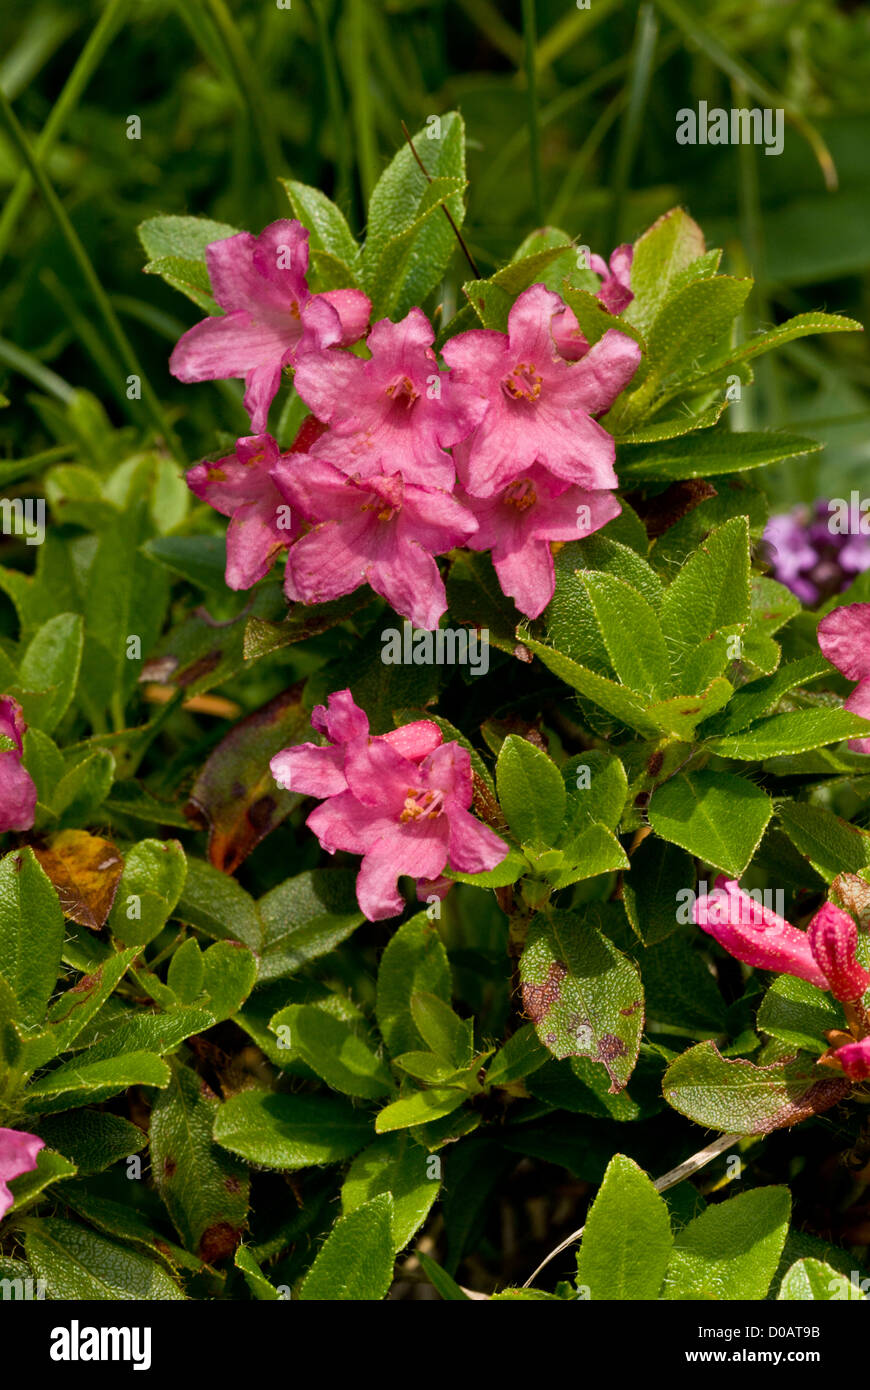 Hairy Alpenrose (Rhododendron hirsutum) in flower on limestone, close-up, German Alps. Stock Photo